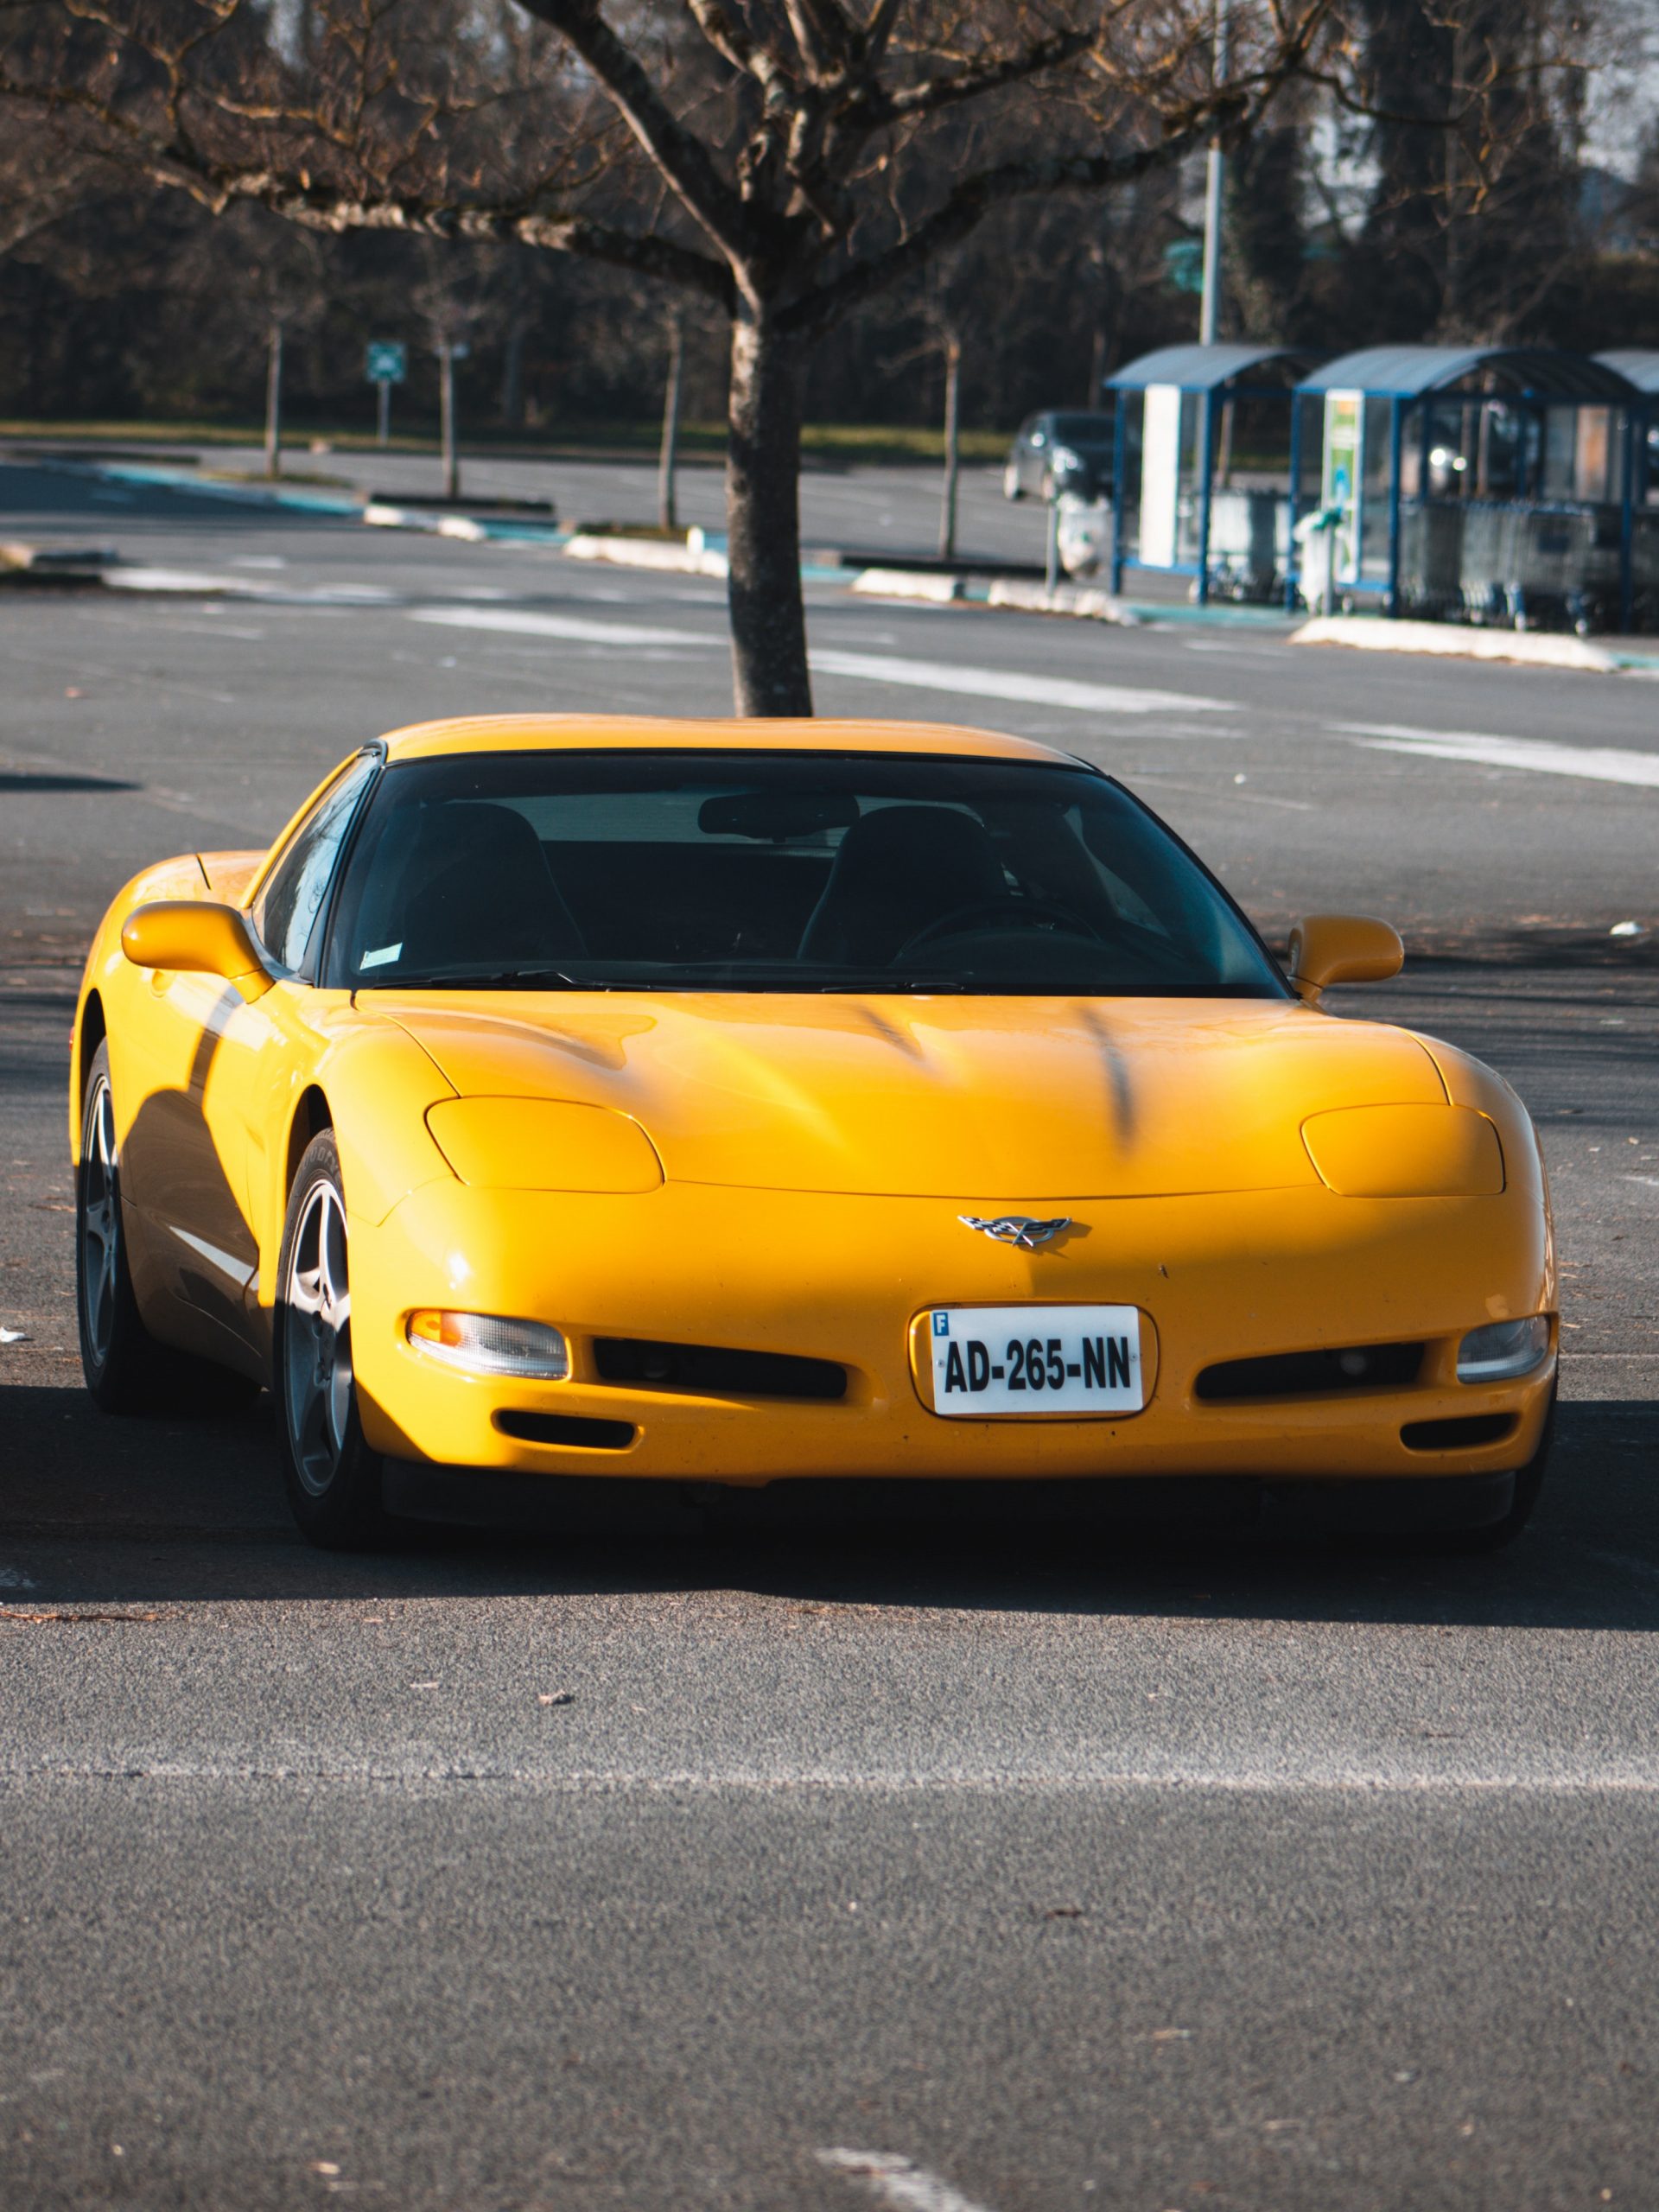 A yellow Chevrolet Corvette shot from the front 3/4 angle